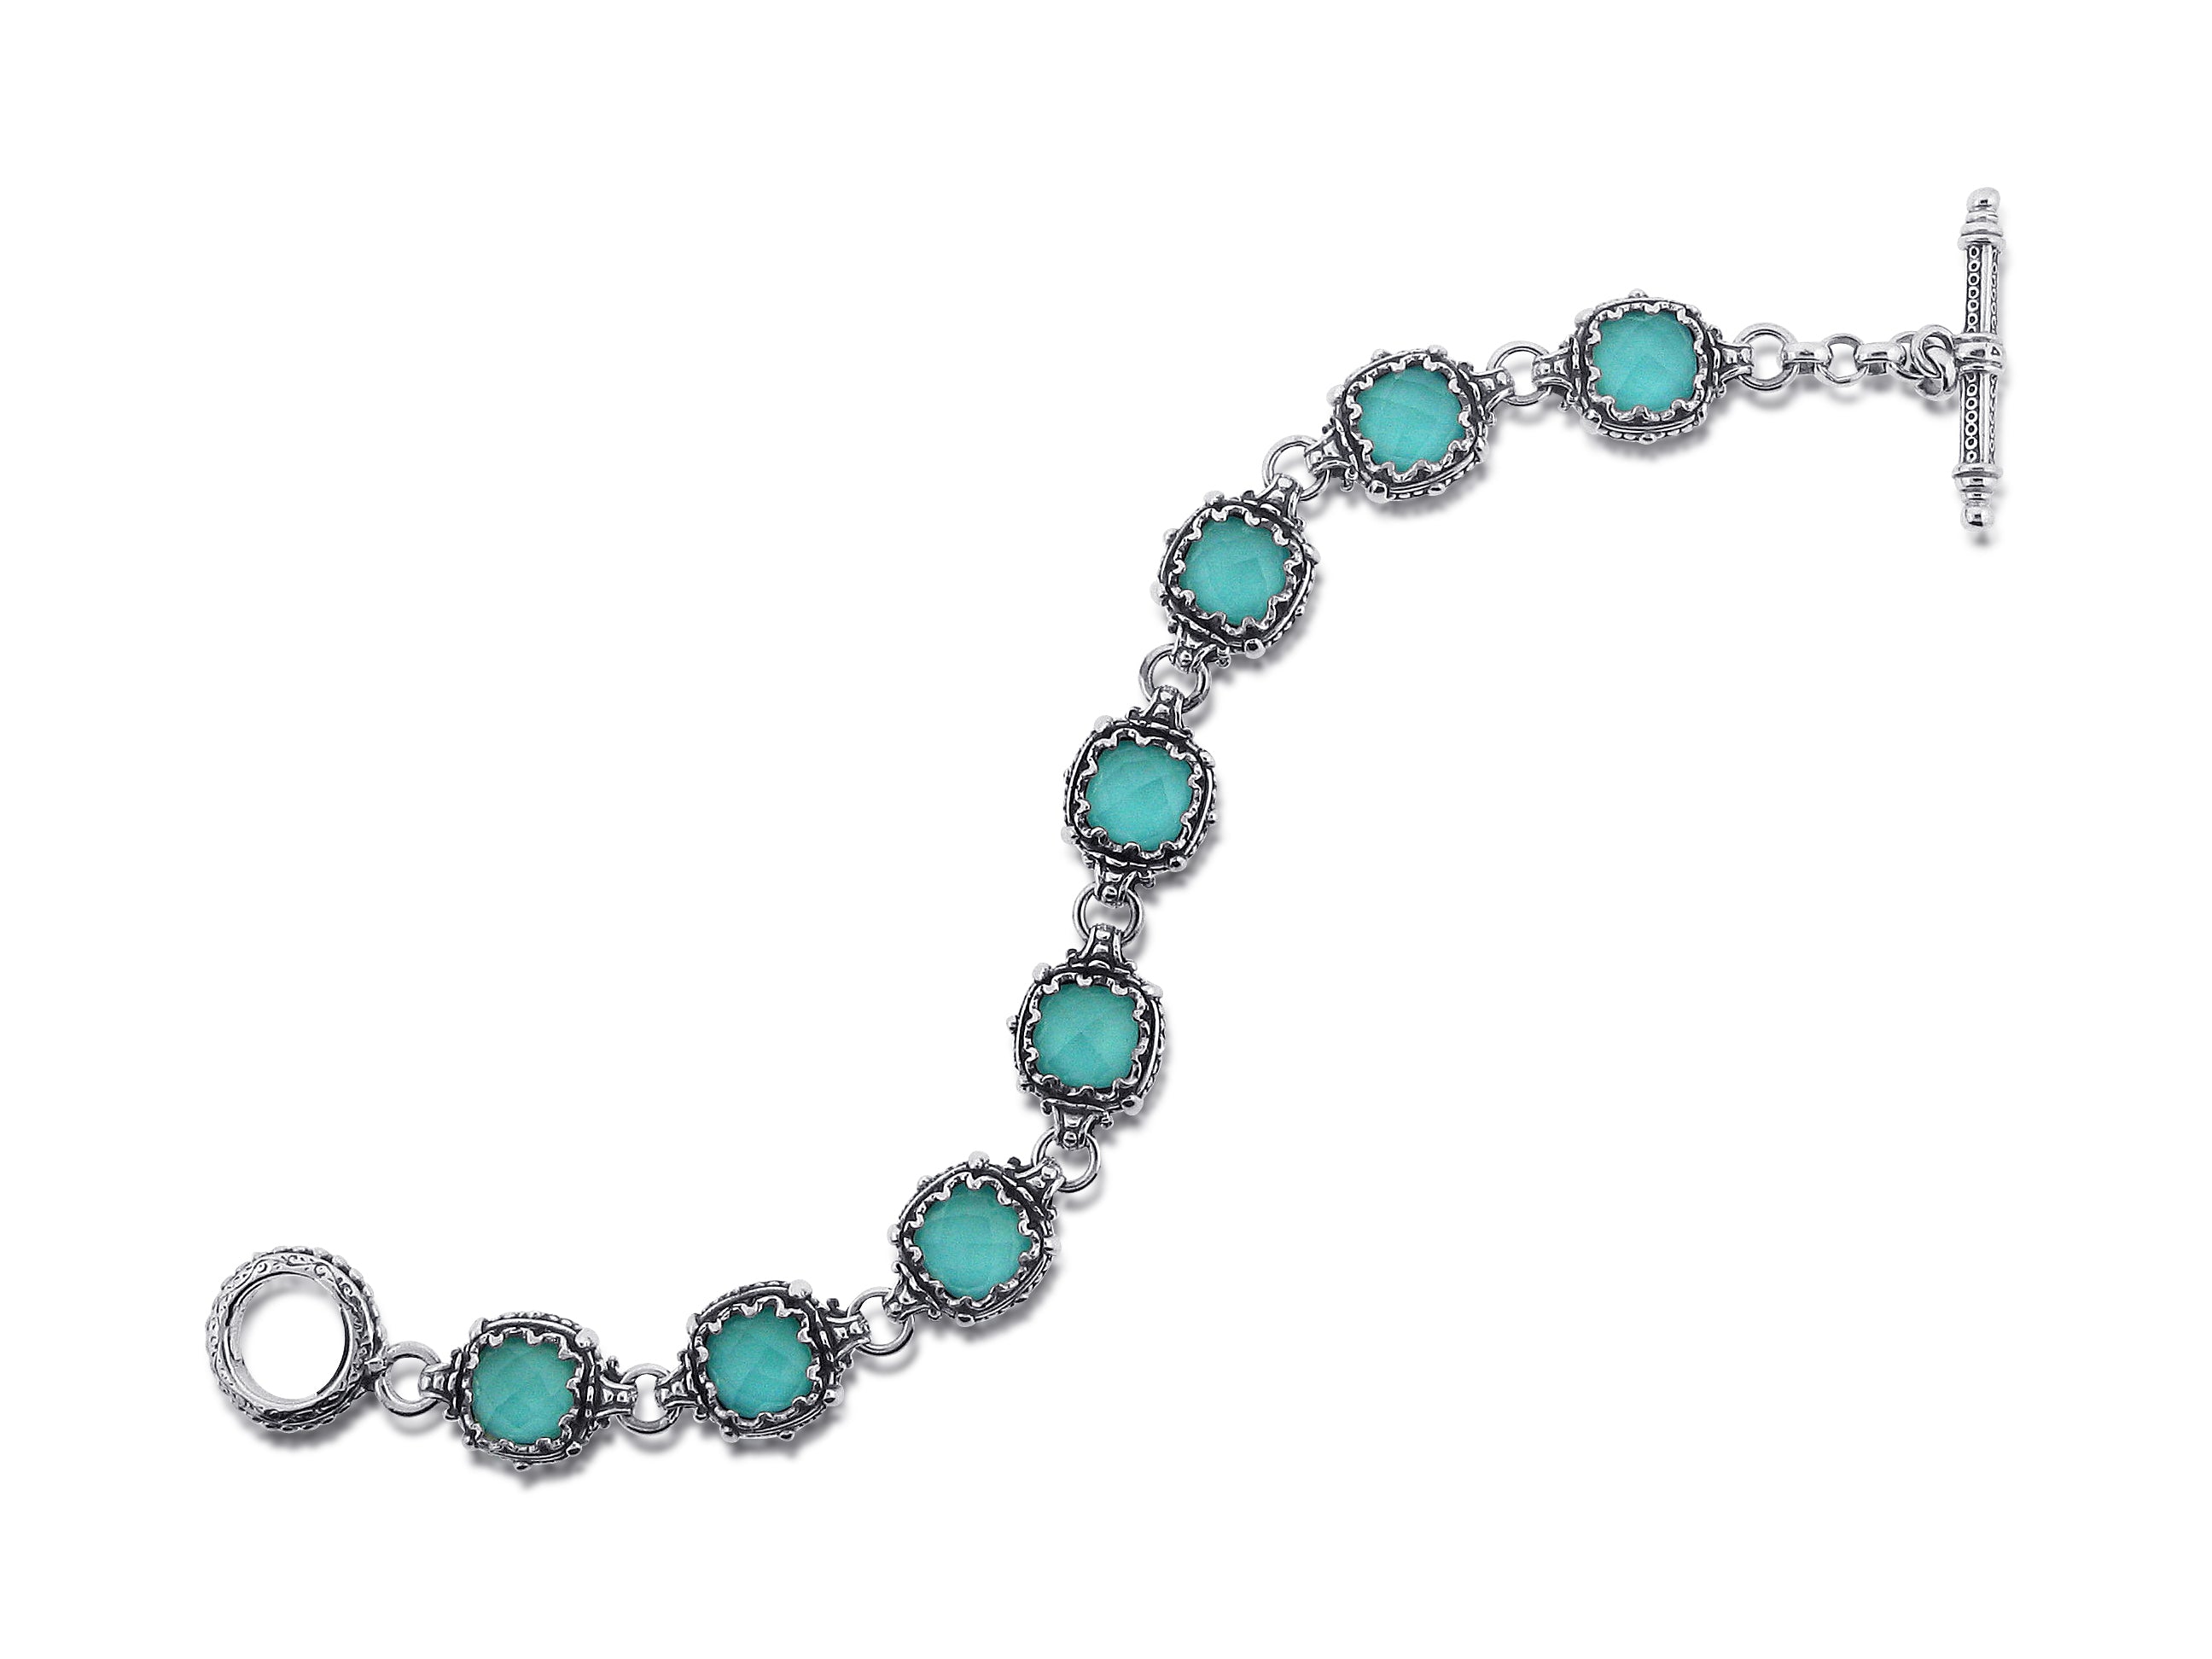 KONSTANTINO STERLING SILVER, ROCK CRYSTAL OVER TURQUOISE BRACELET FROM THE AEGEAN COLLECTION